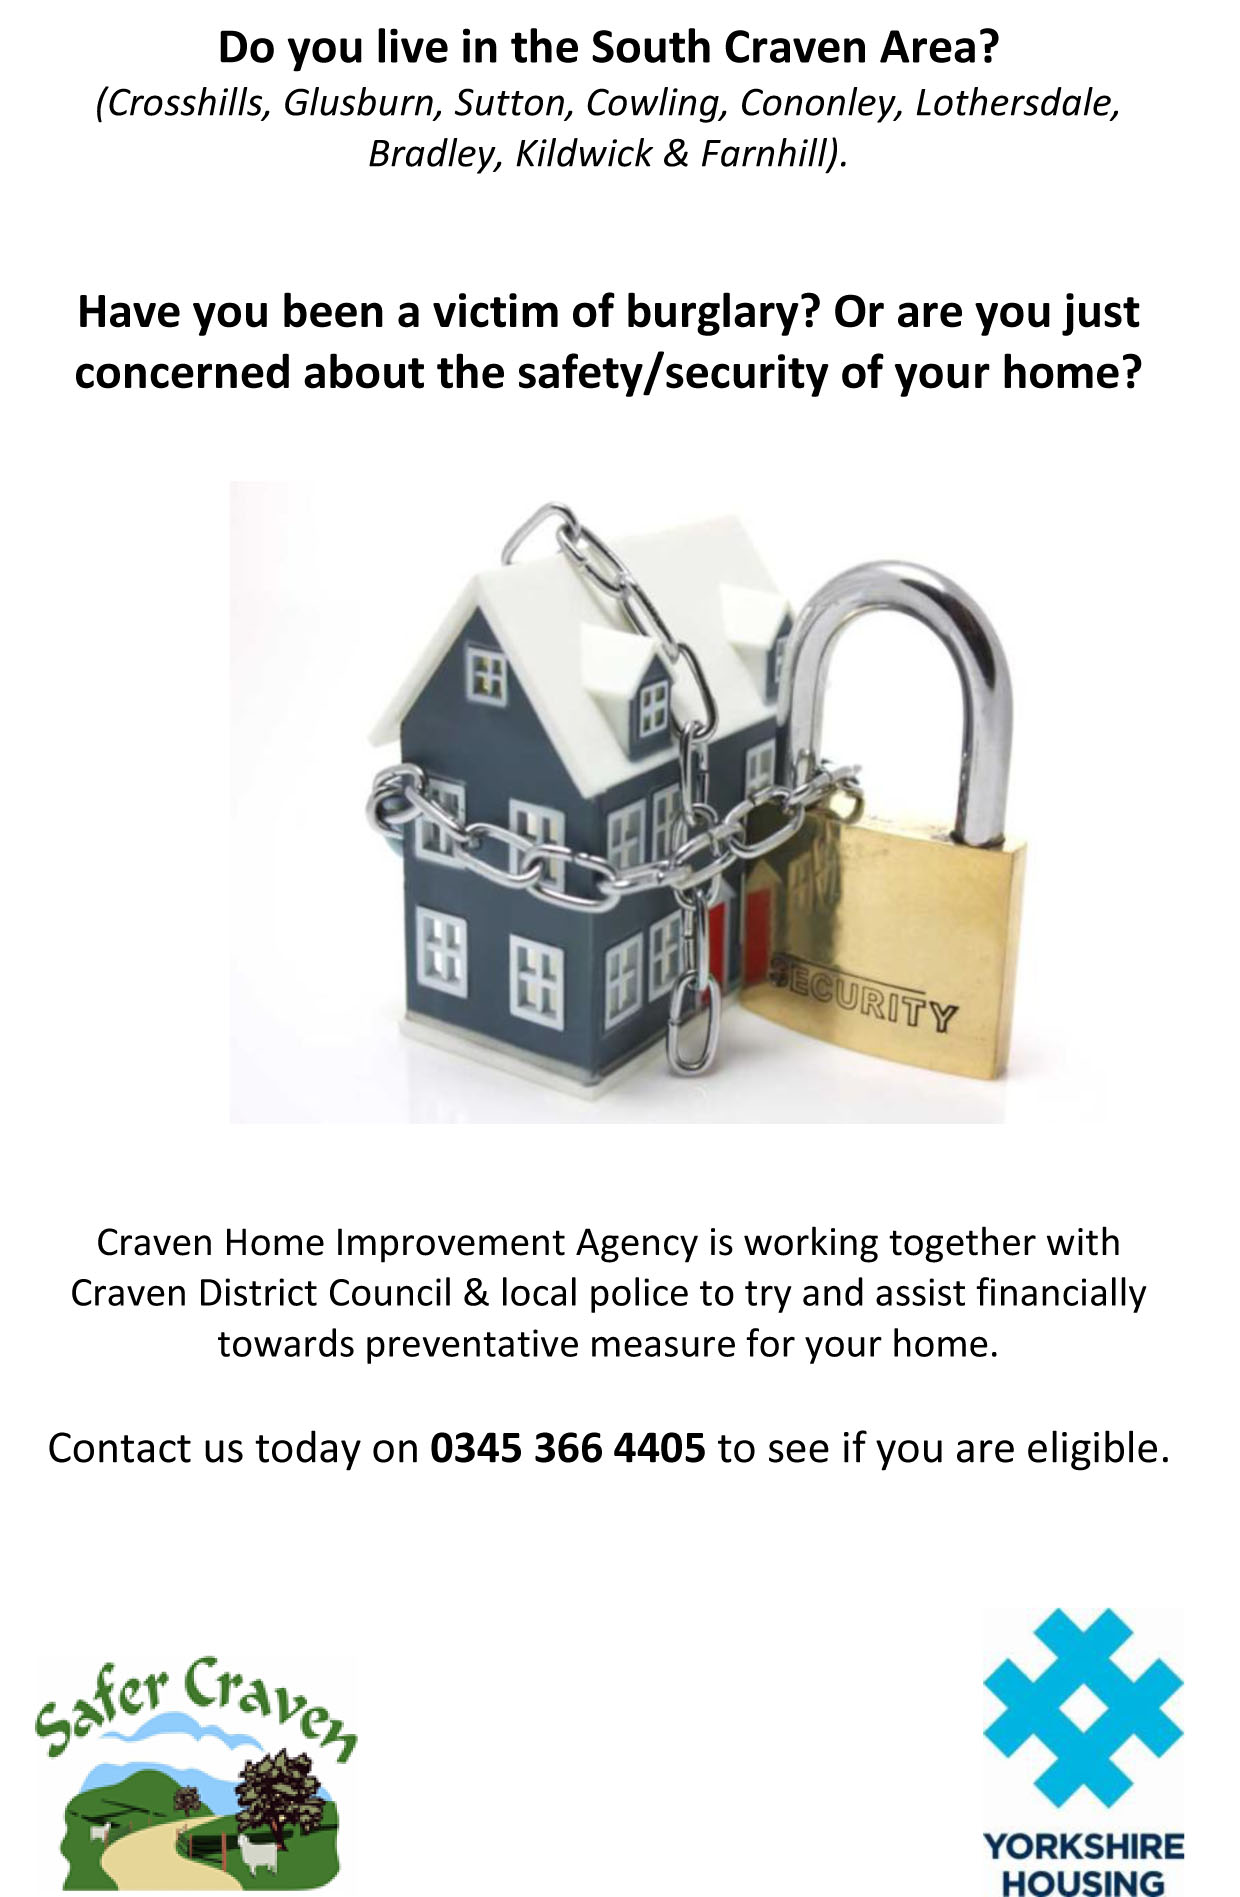 Home security upgrade flyer South Craven area